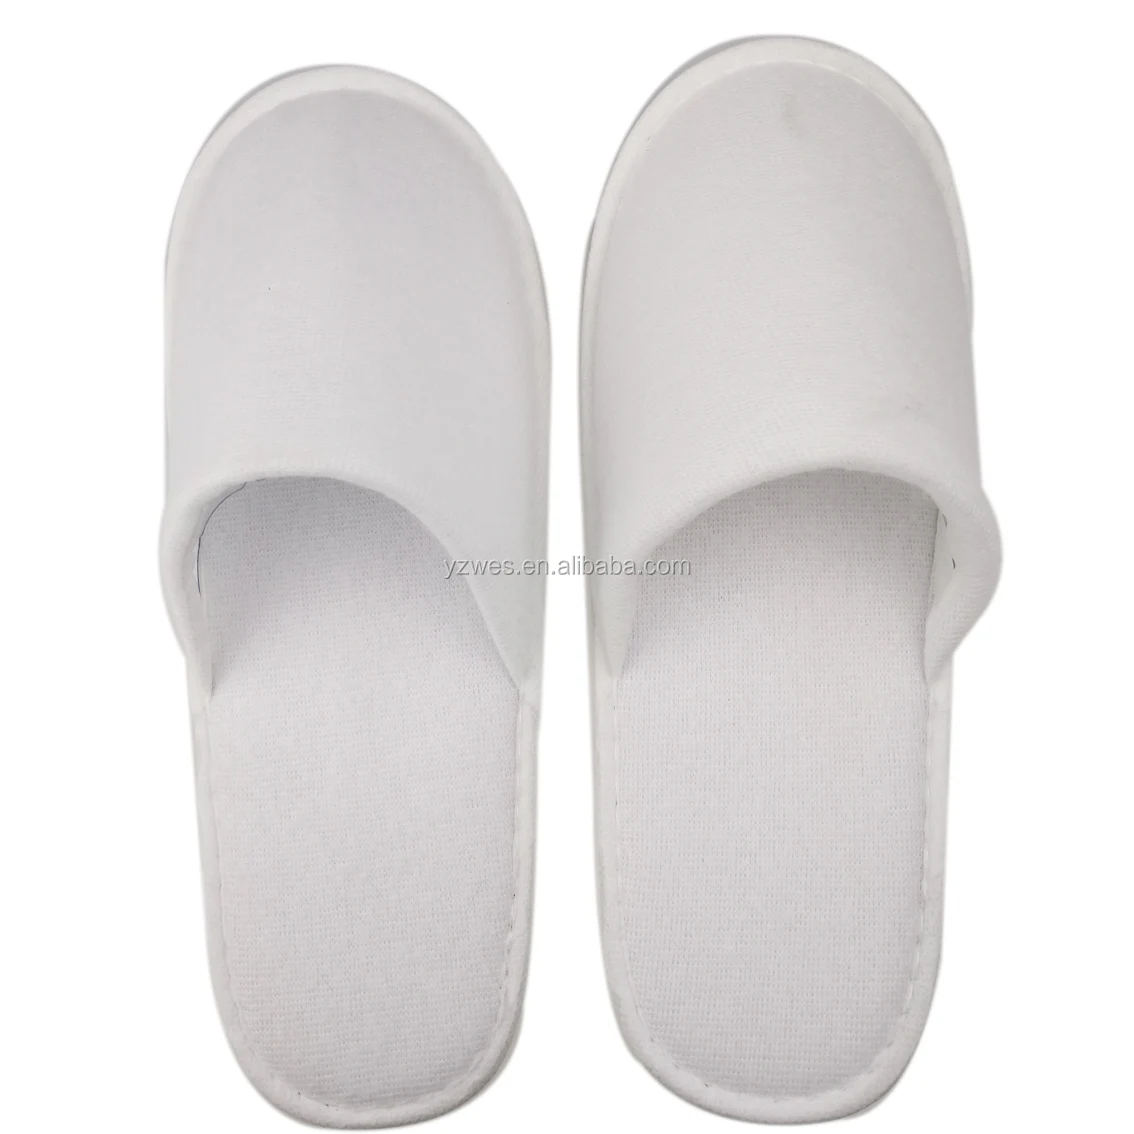 Disposable Paper Hotel Bath Use White Slippers - Buy White Slippers ...